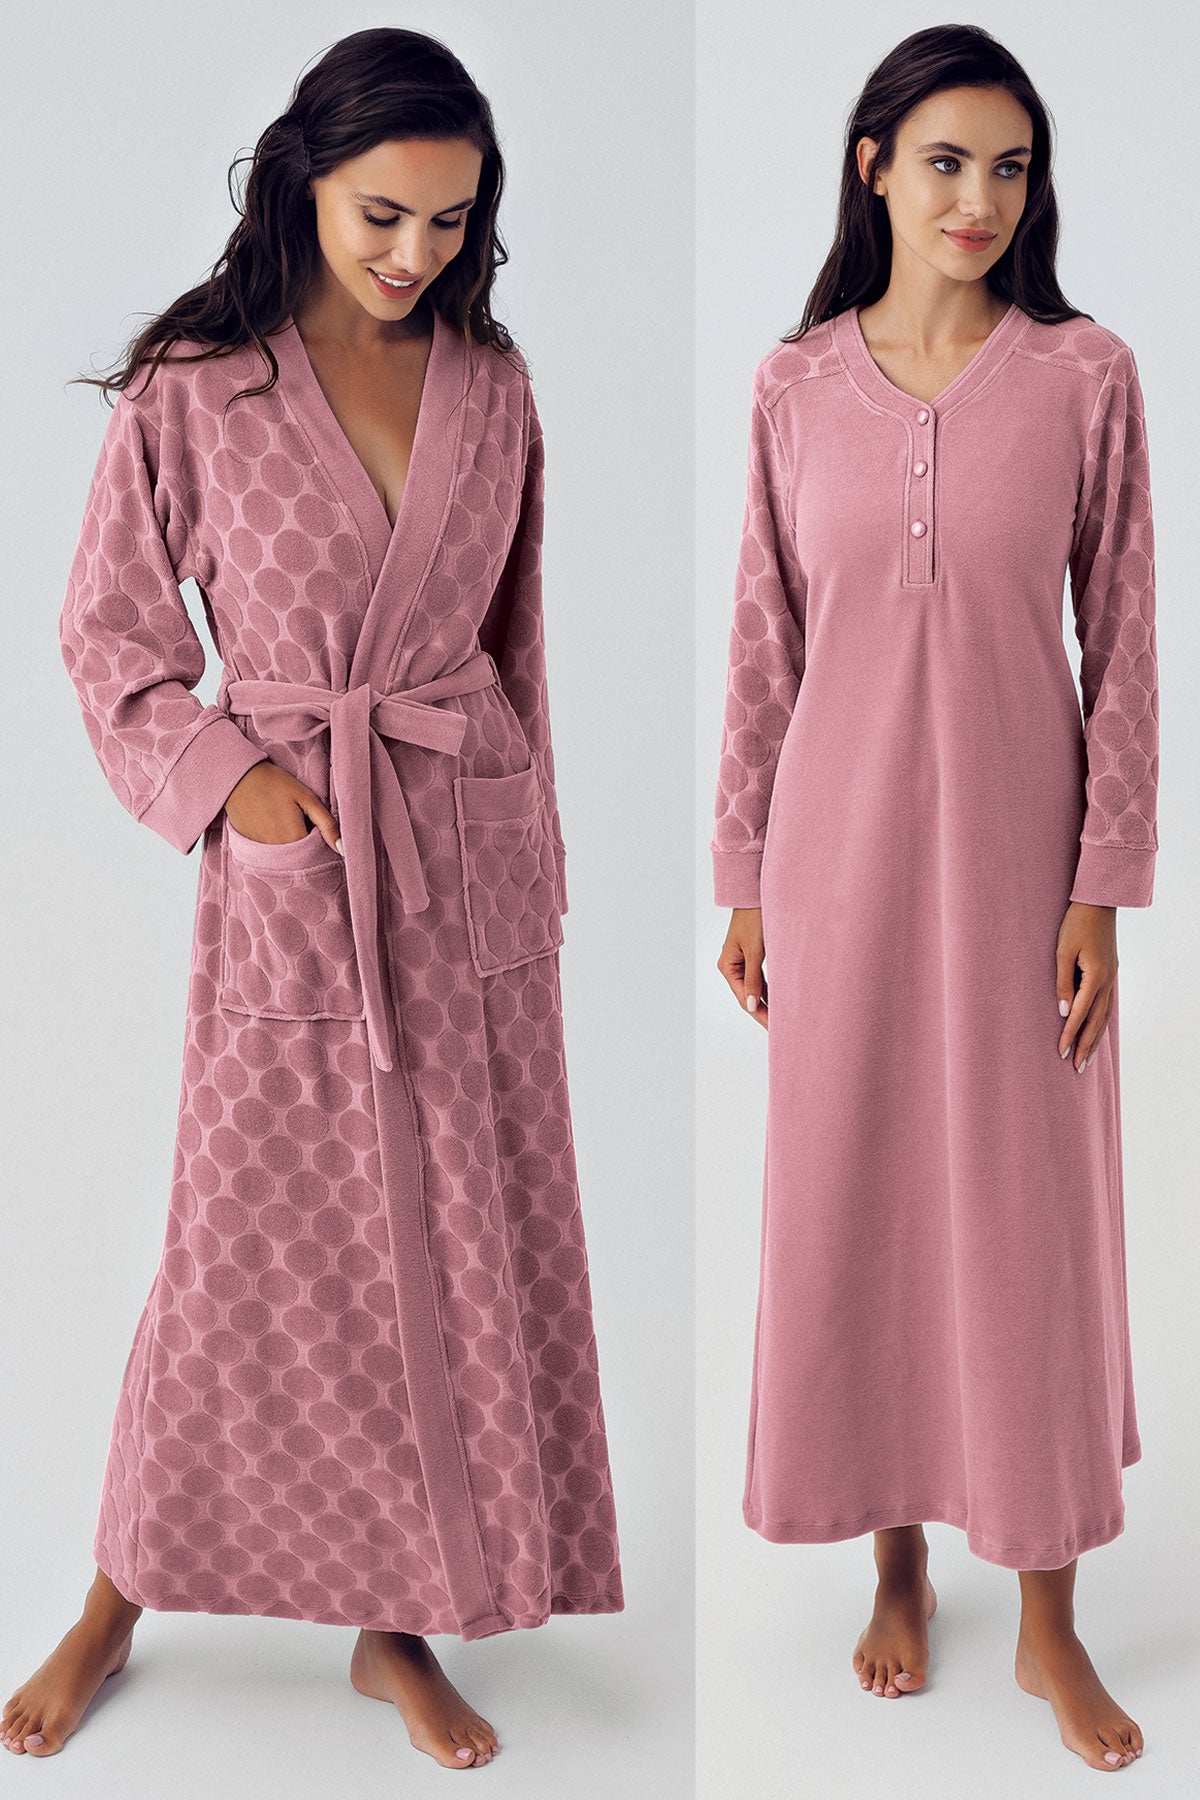 Shopymommy 500101 Terry Jacquard Maternity & Nursing Nightgown With Robe Dried Rose